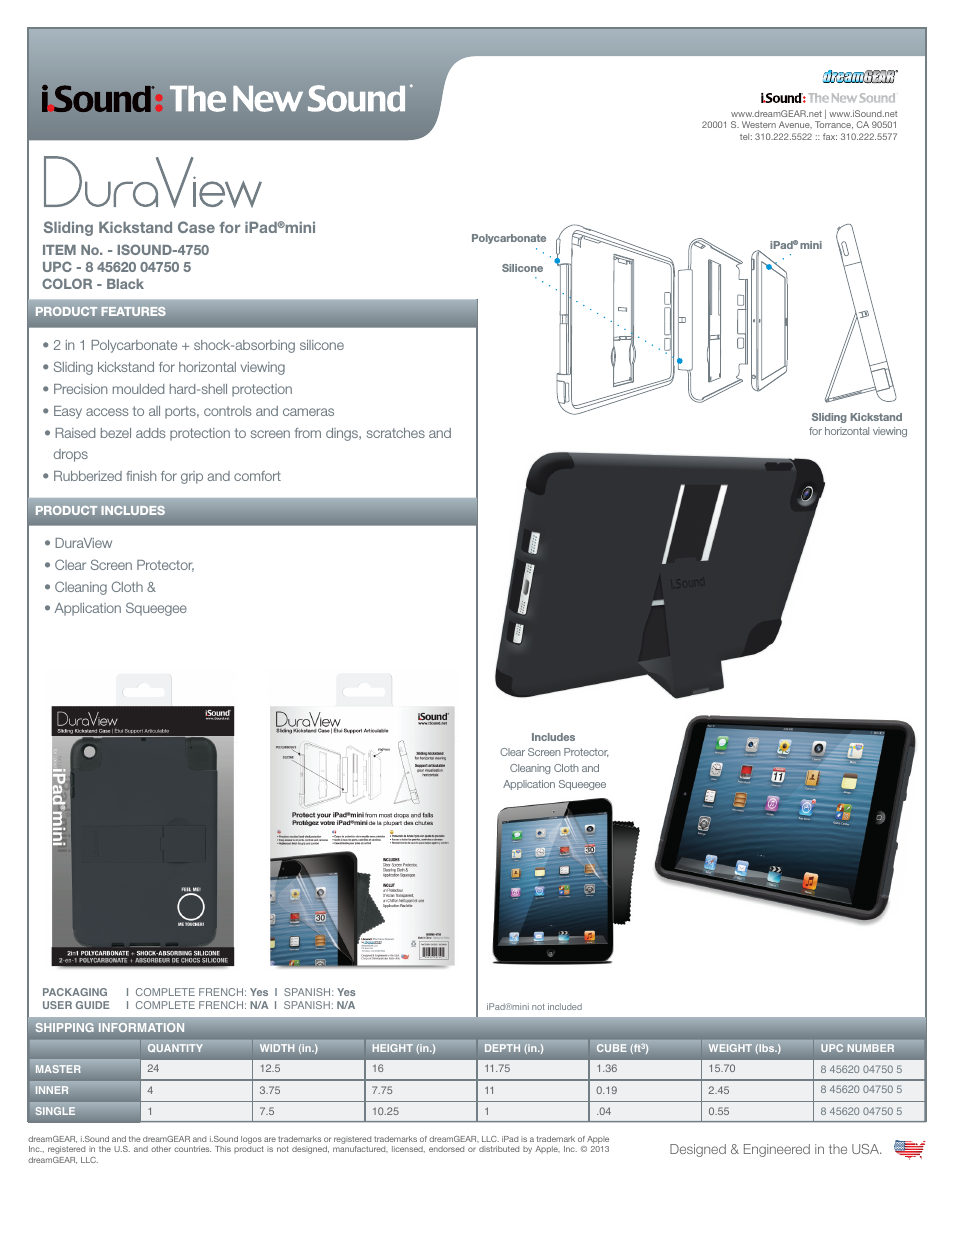 DuraView for iPadmini - Sell Sheet